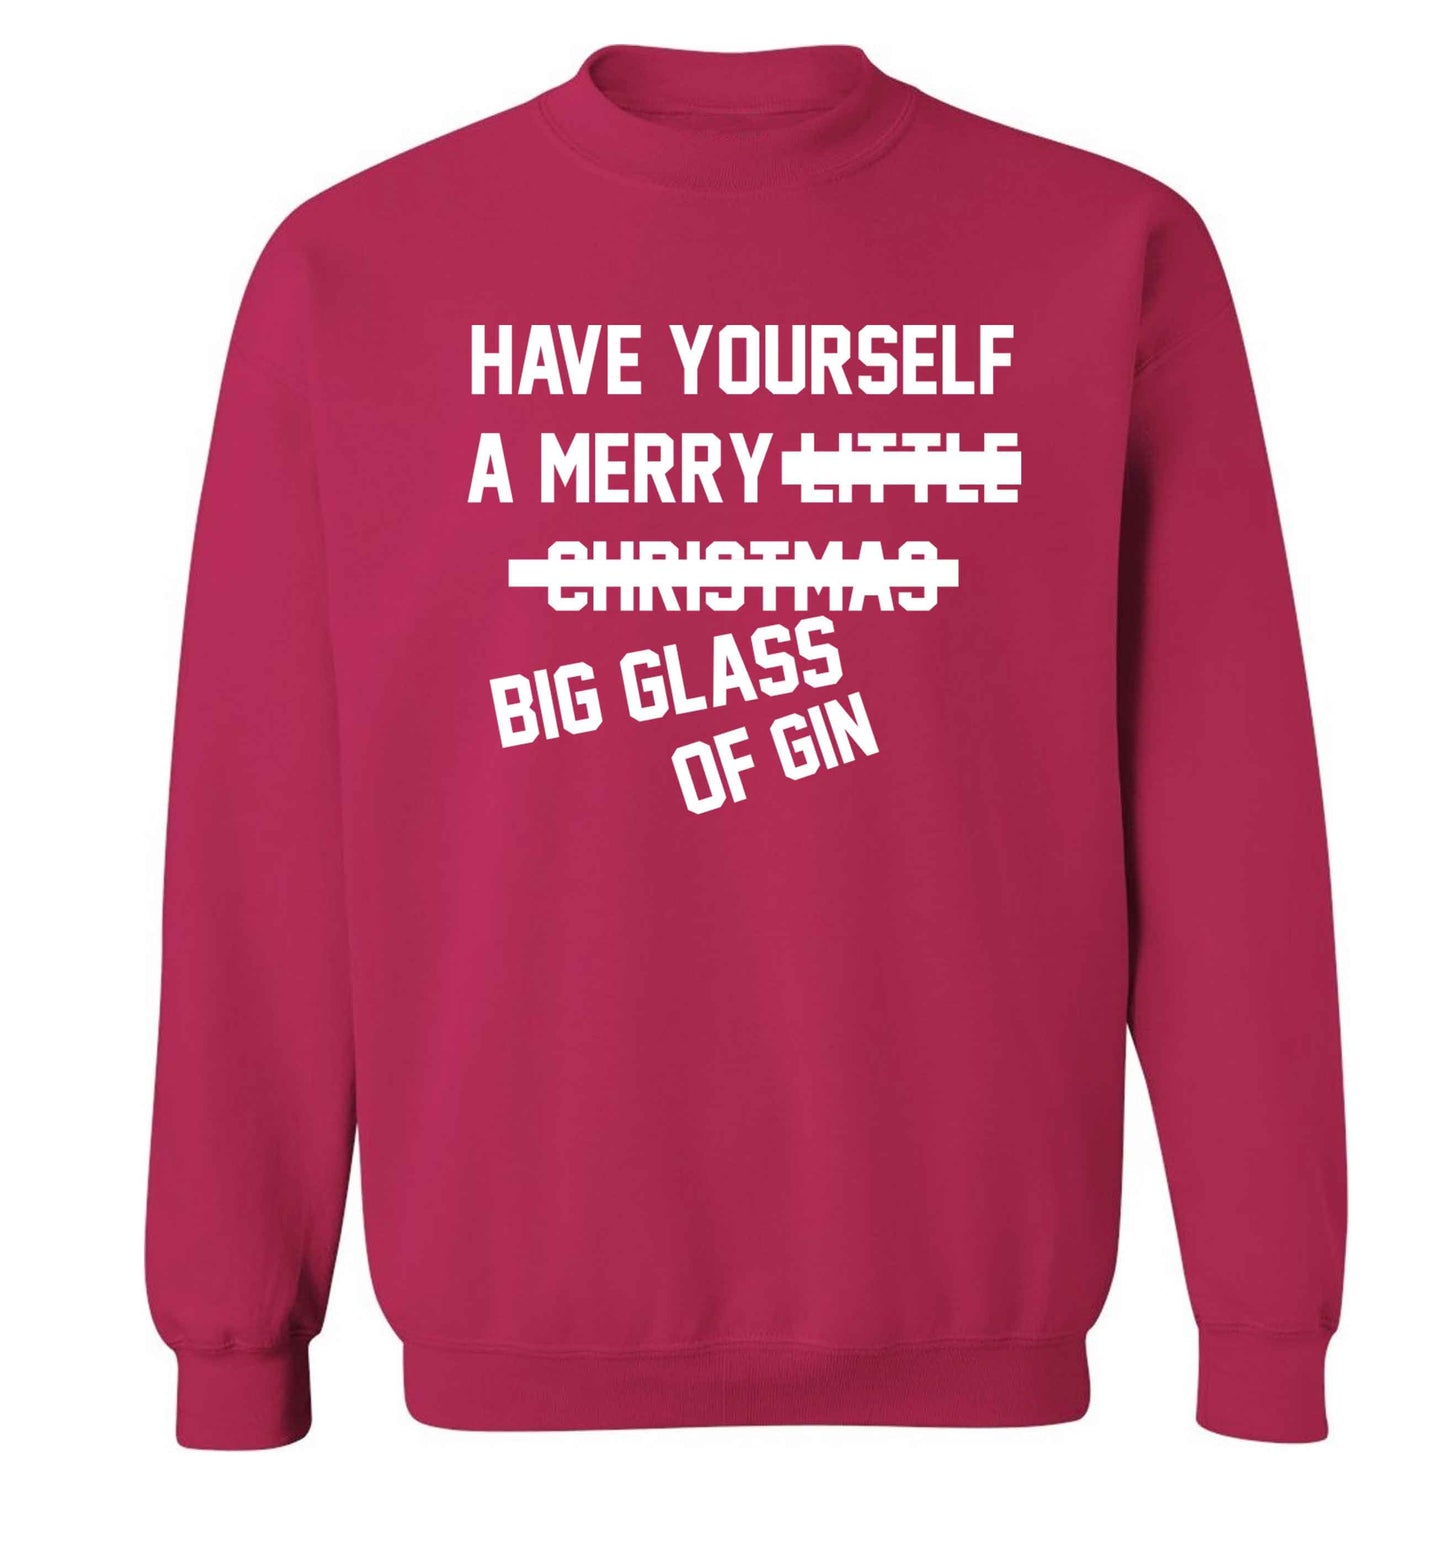 Have yourself a merry big glass of gin Adult's unisex pink Sweater 2XL